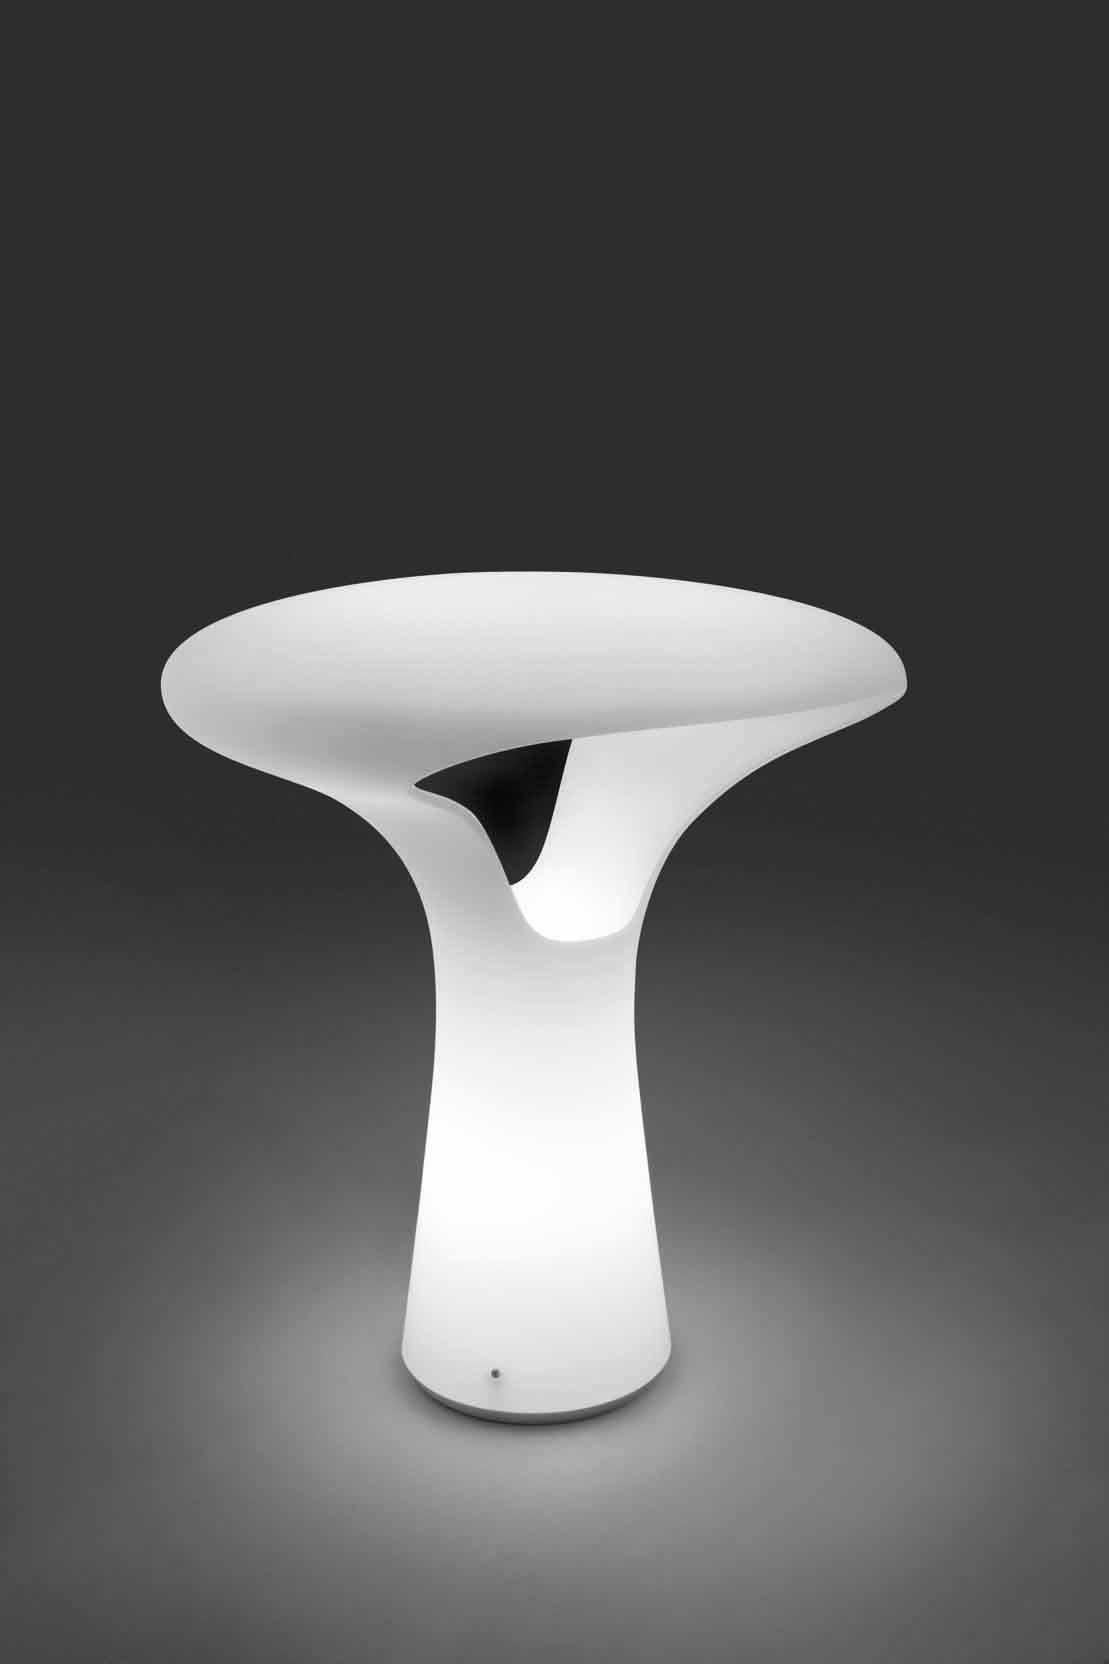 A uniquely designed table lamp made possible by the use of a water-jet cut, allowing for the designer to explore and create shapes that give a new direction to the traditional use of Murano glass. Glass color tone in satin white. Metal parts in